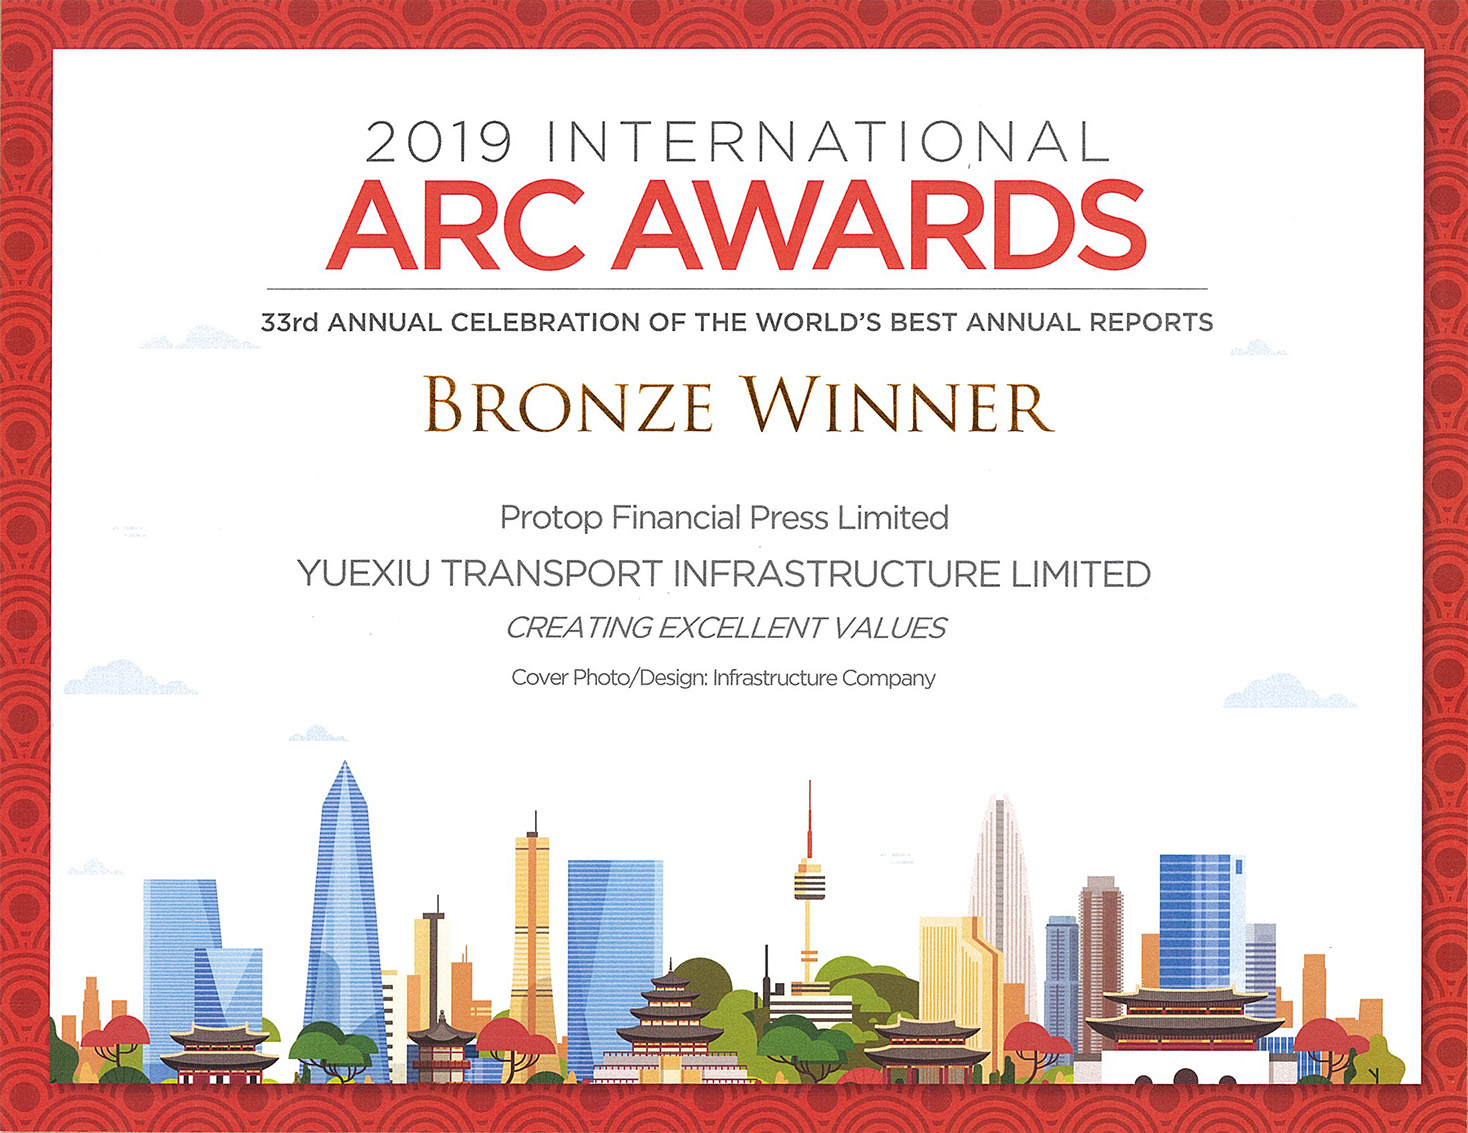 YUEXIU TRANSPORT INFRASTRUCTURE LIMITED – 2019 ARC AWARDS BRONZE WINNER Cover Photo/Design: Infrastructure Company